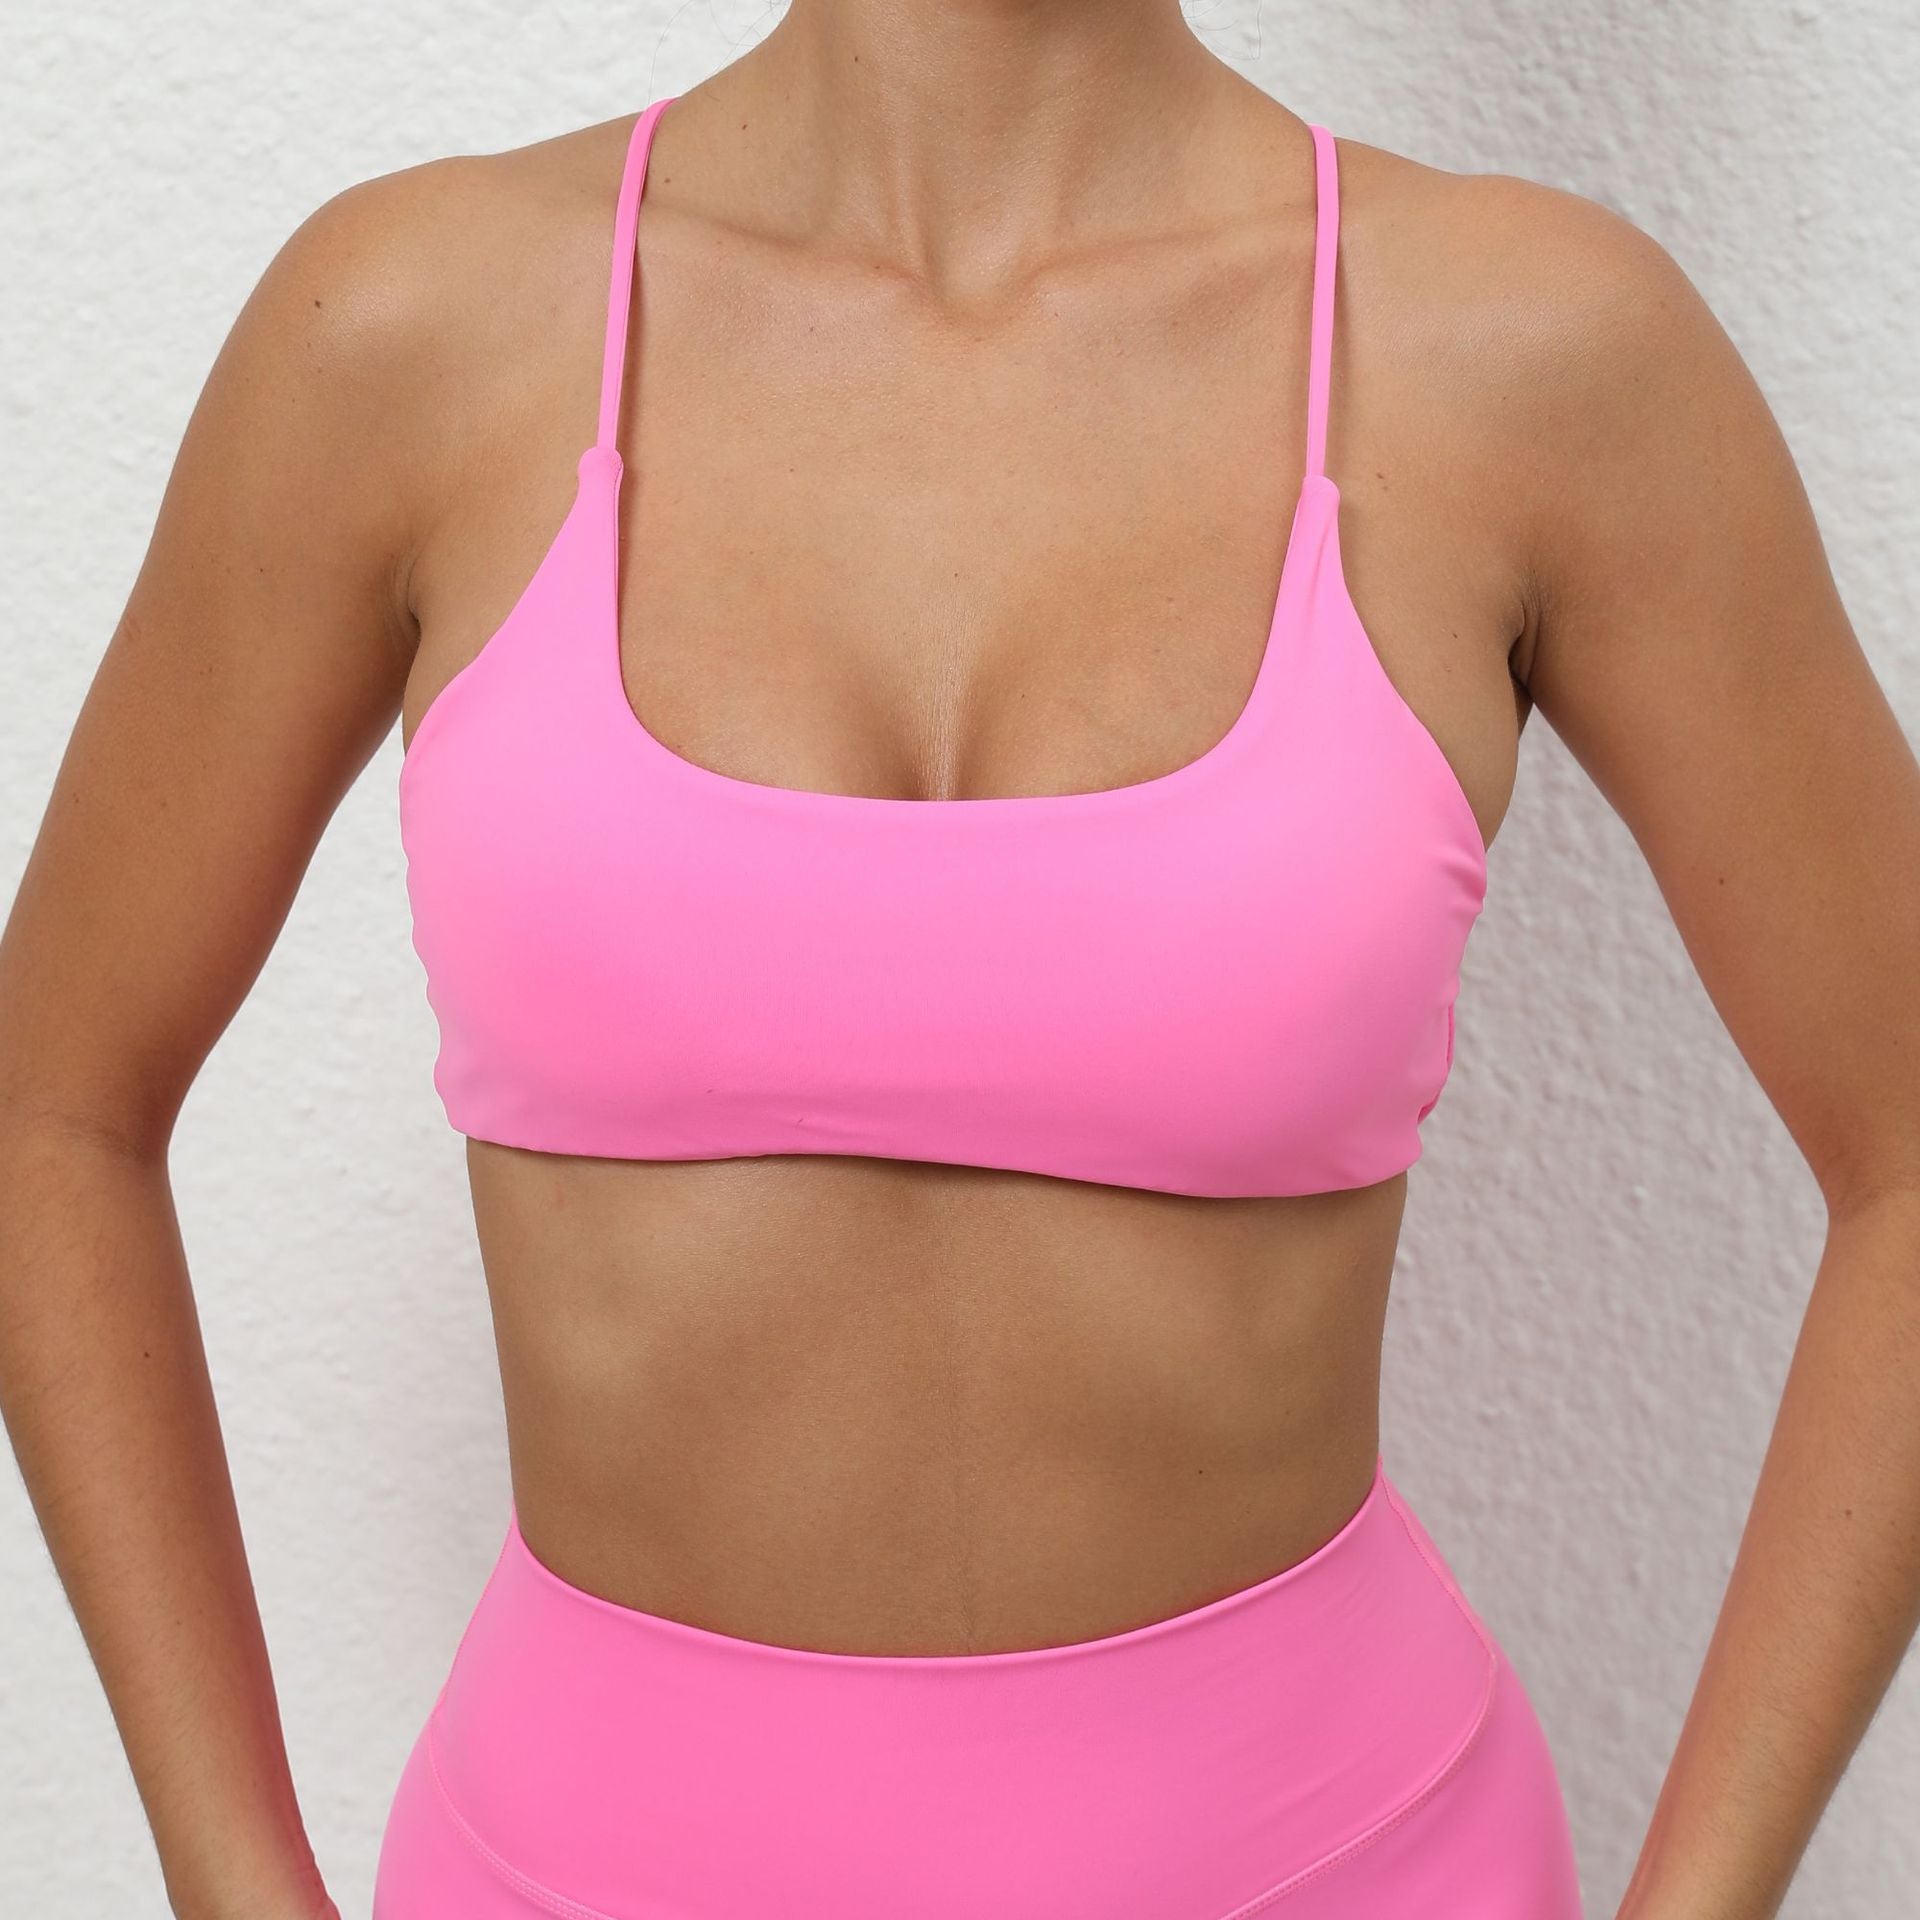 Louise Beauty naked Back Fitness Yoga Top